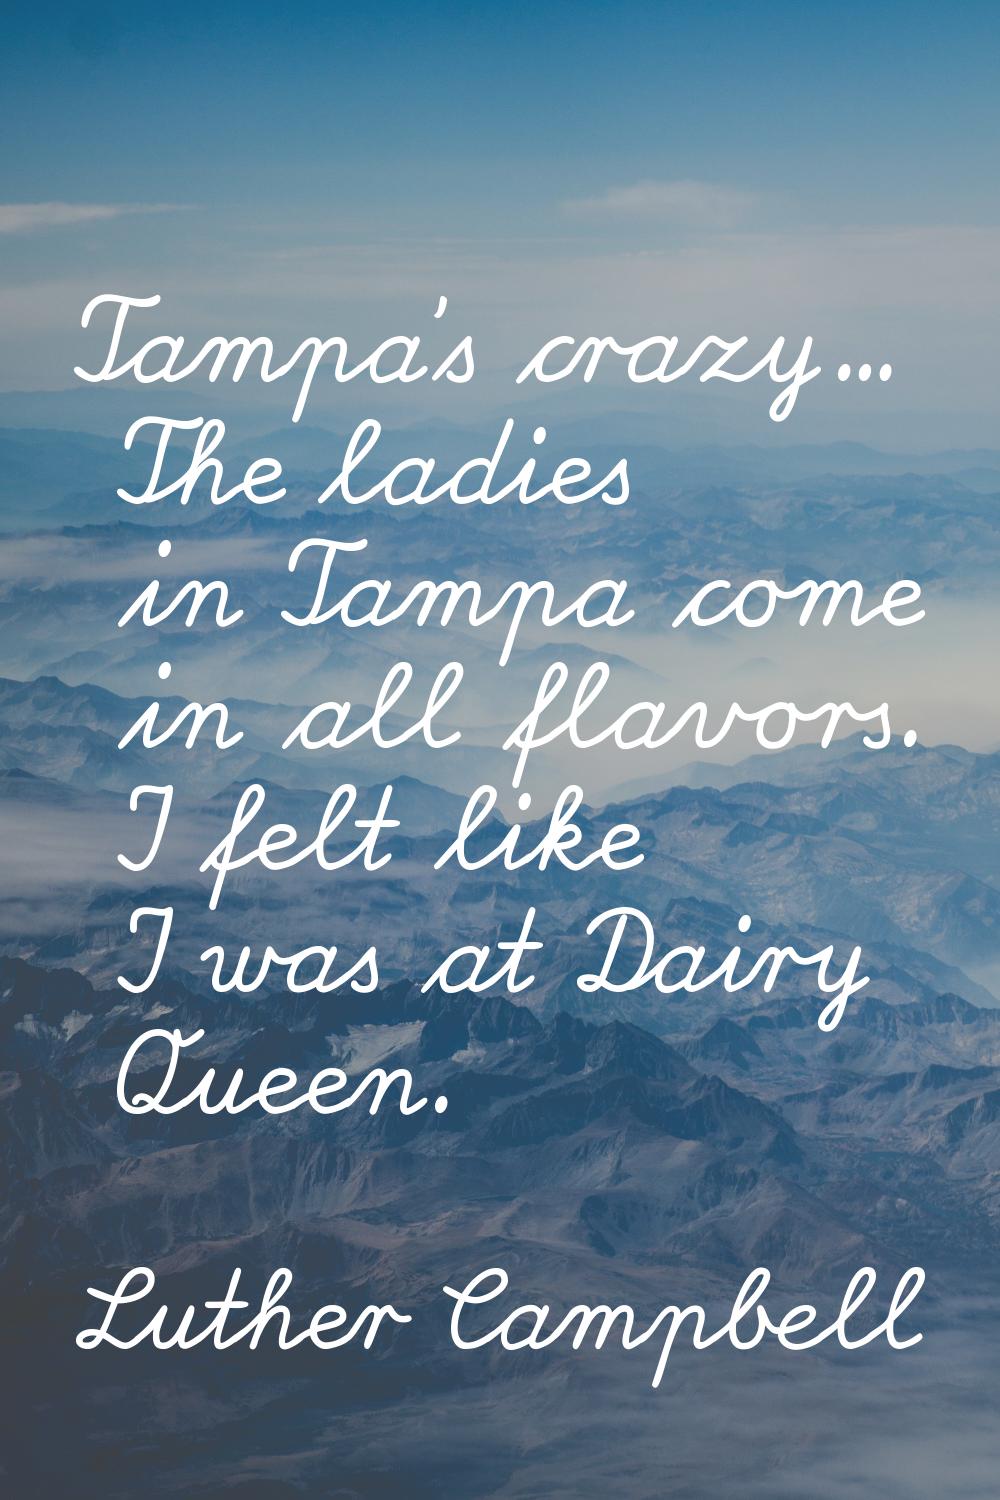 Tampa's crazy... The ladies in Tampa come in all flavors. I felt like I was at Dairy Queen.